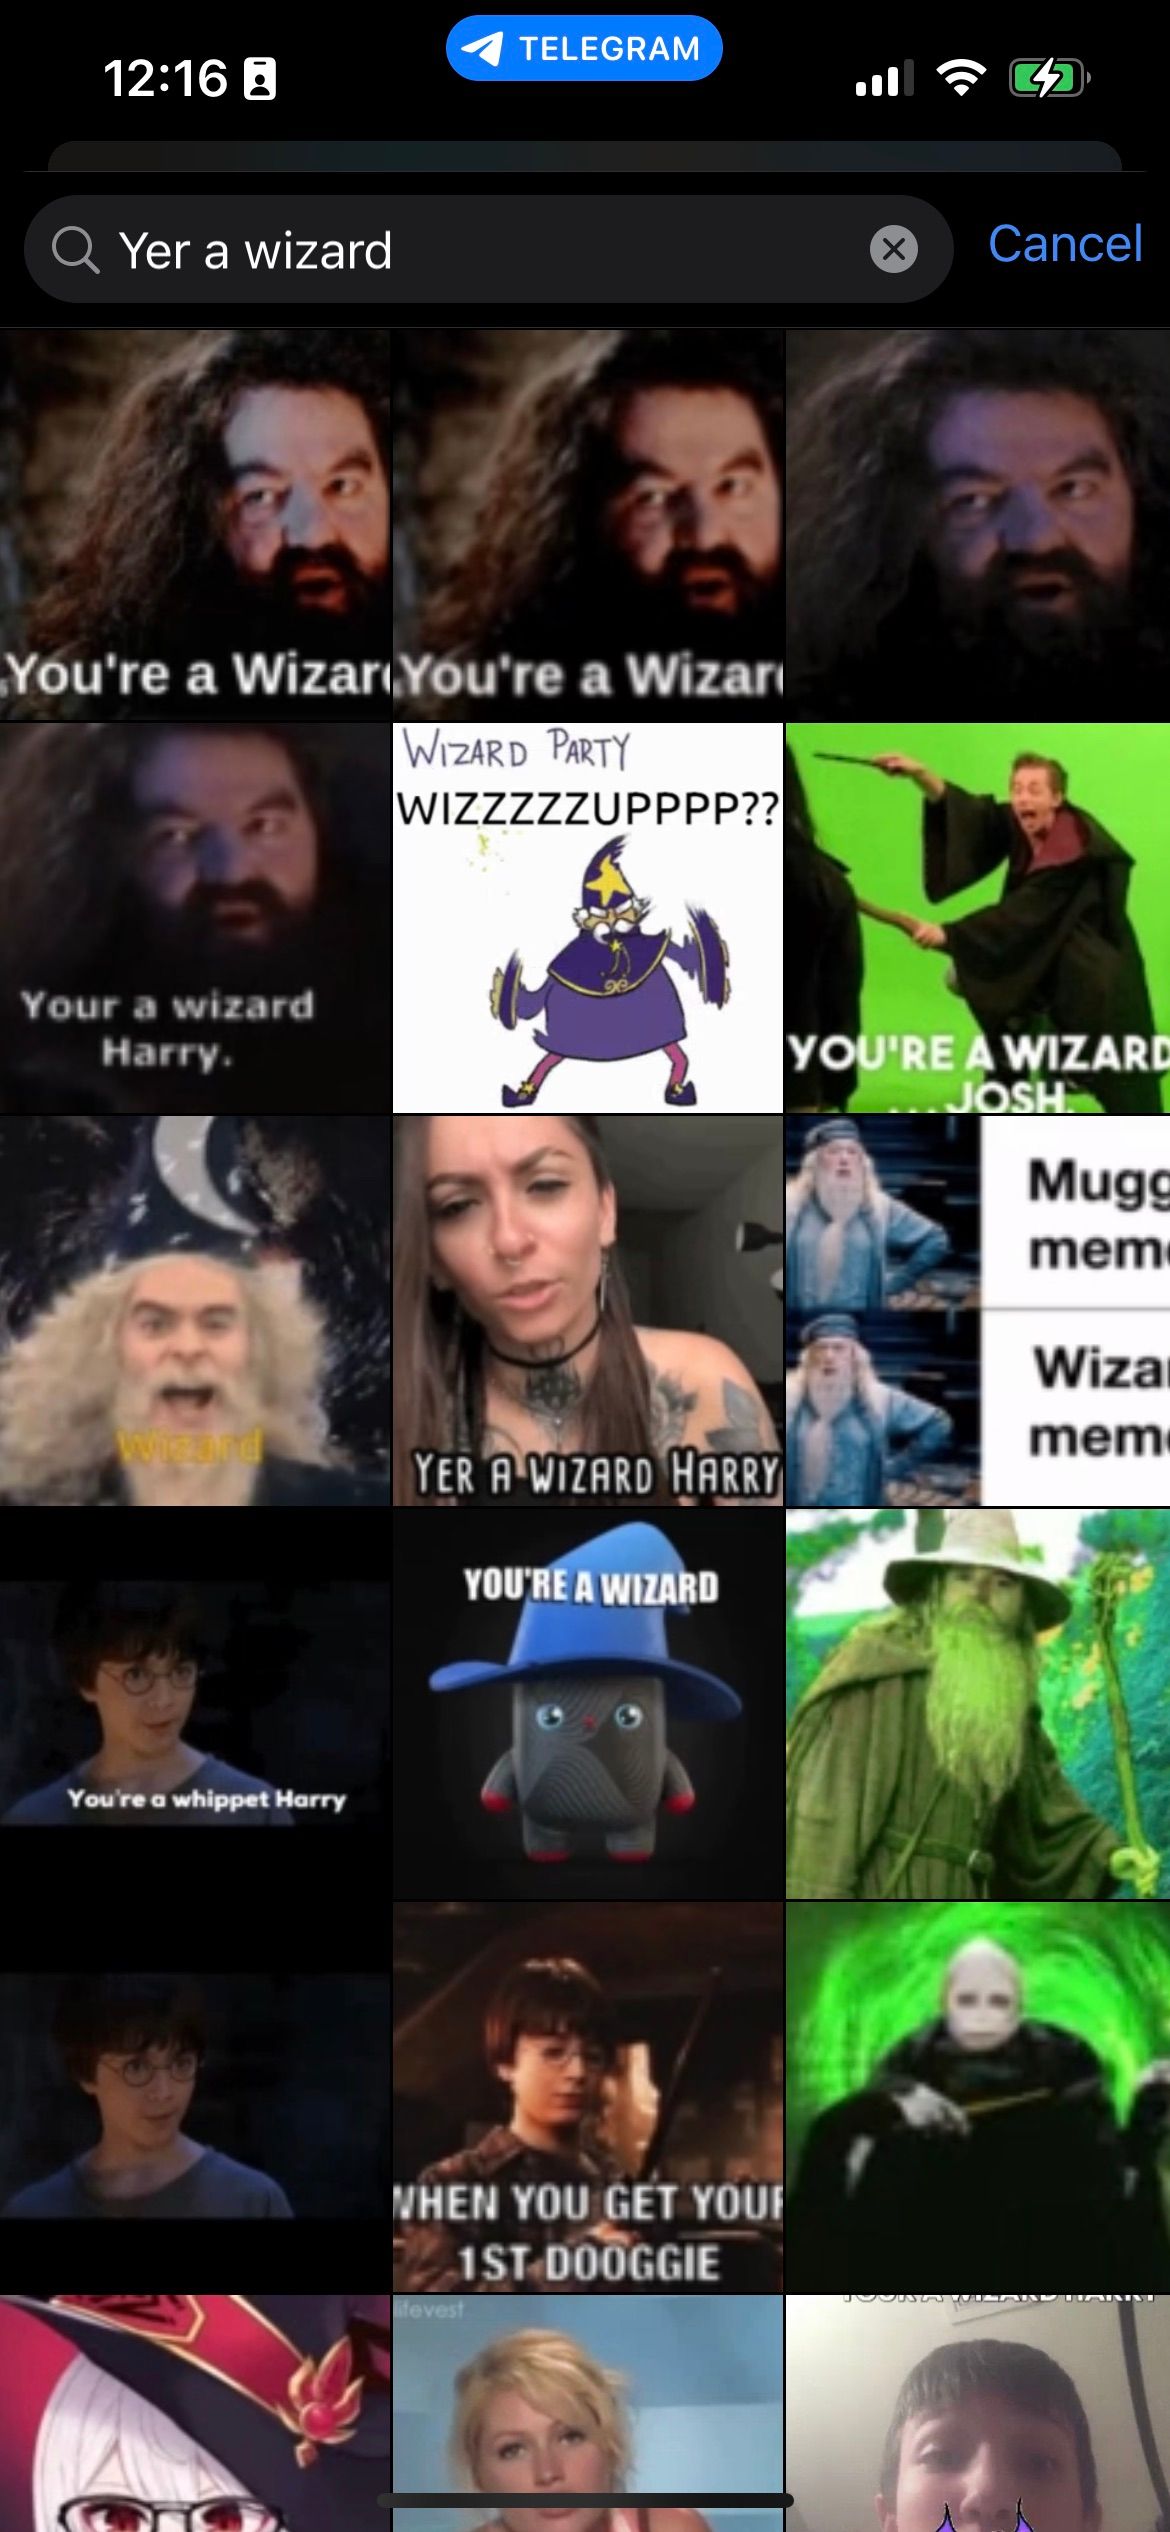 Telegram "Yer a Wizard" GIF search results